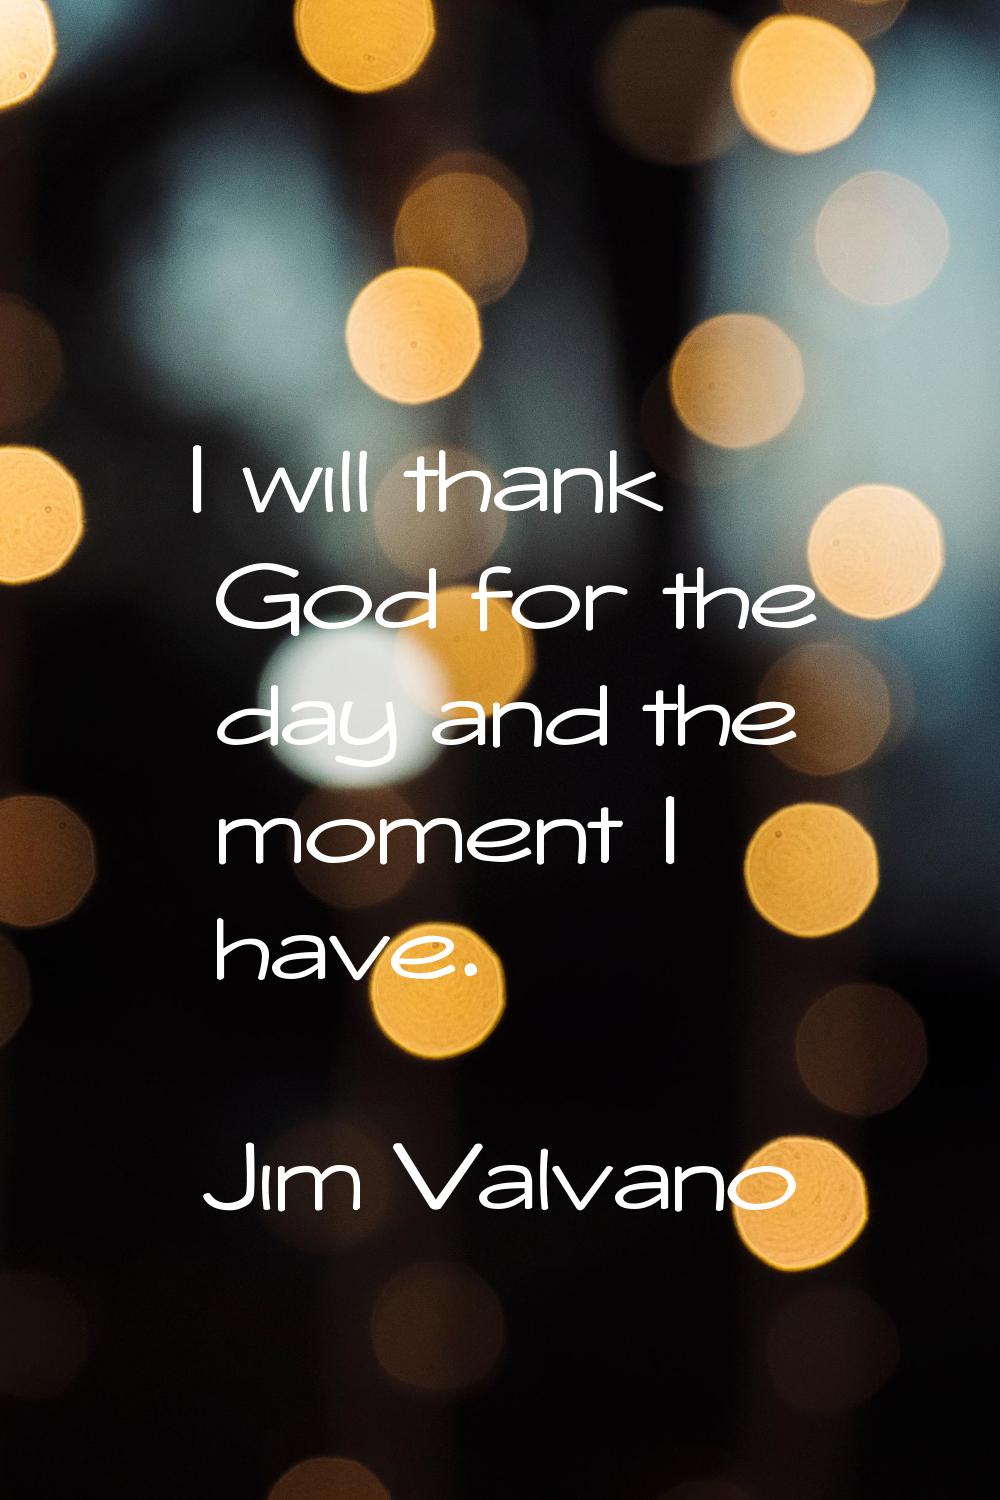 I will thank God for the day and the moment I have.